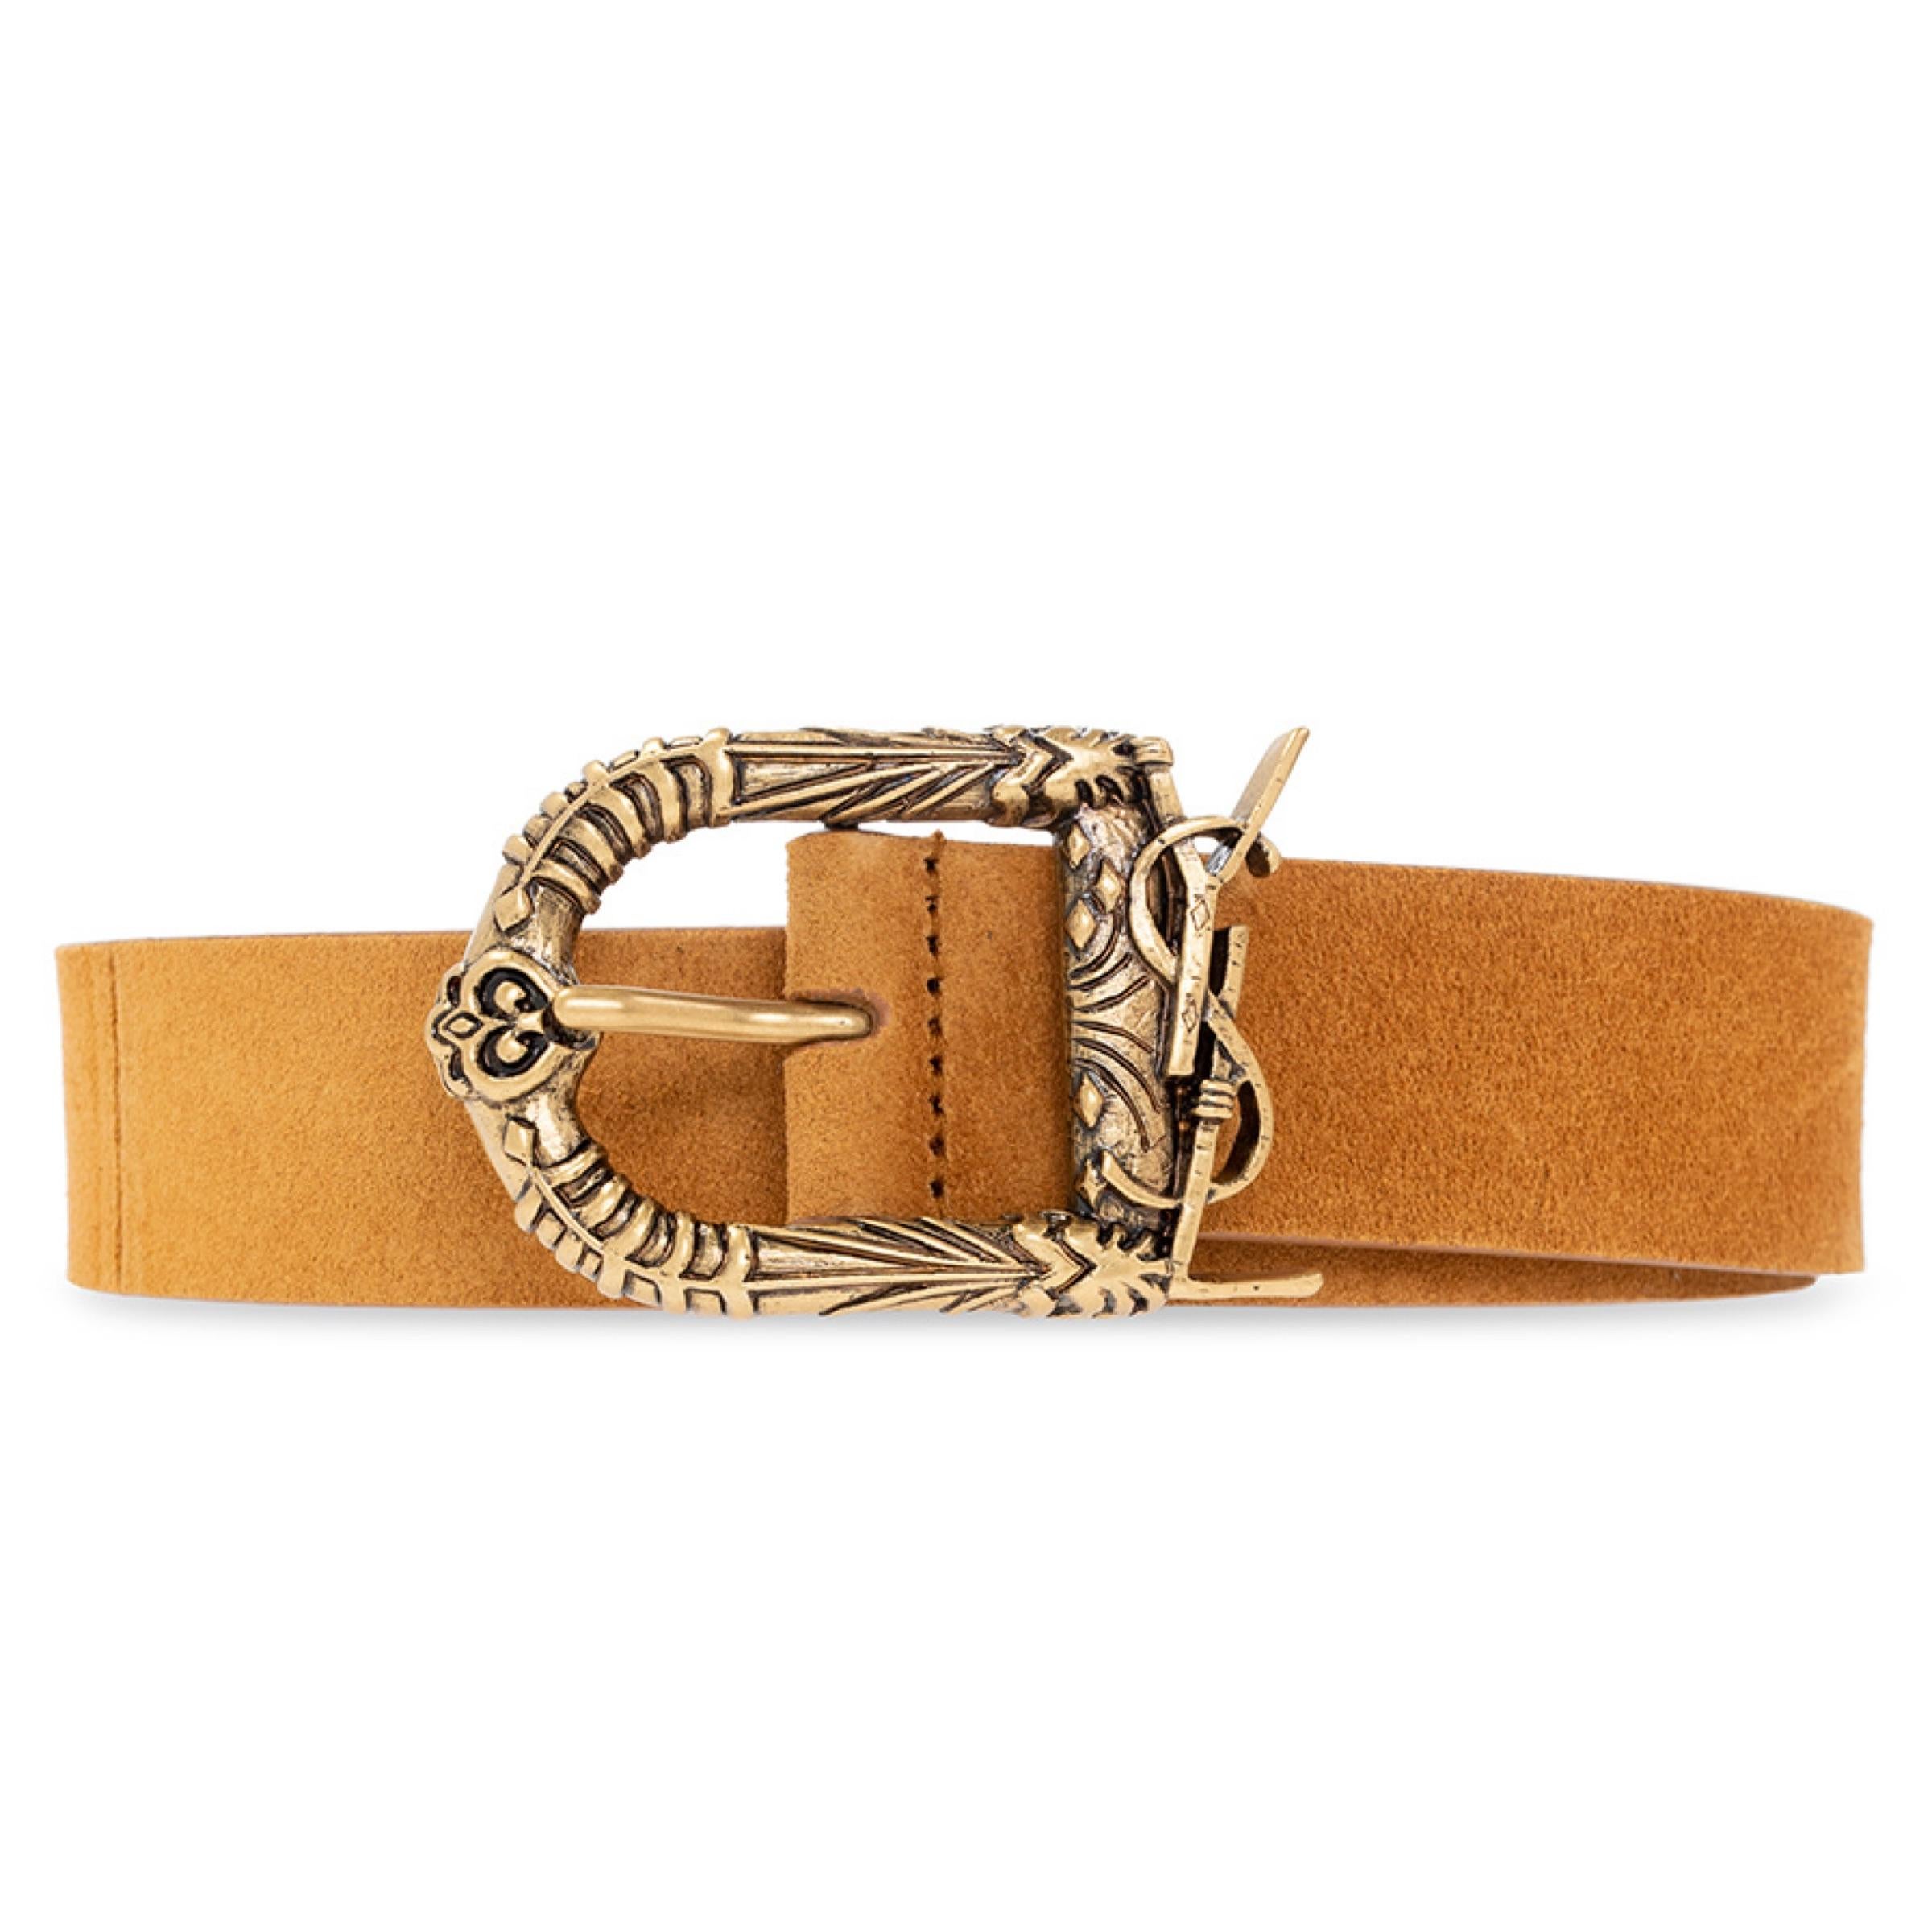 New Saint Laurent Brown Decorative Buckle Leather Belt Size 36 US 90 EU

Authenticity Guaranteed

DETAILS
Brand: Saint Laurent
Condition: Brand new
Gender: Women
Category: Belt
Color: Brown
Material: Leather
Front YSL logo
Decorative buckle
Made in